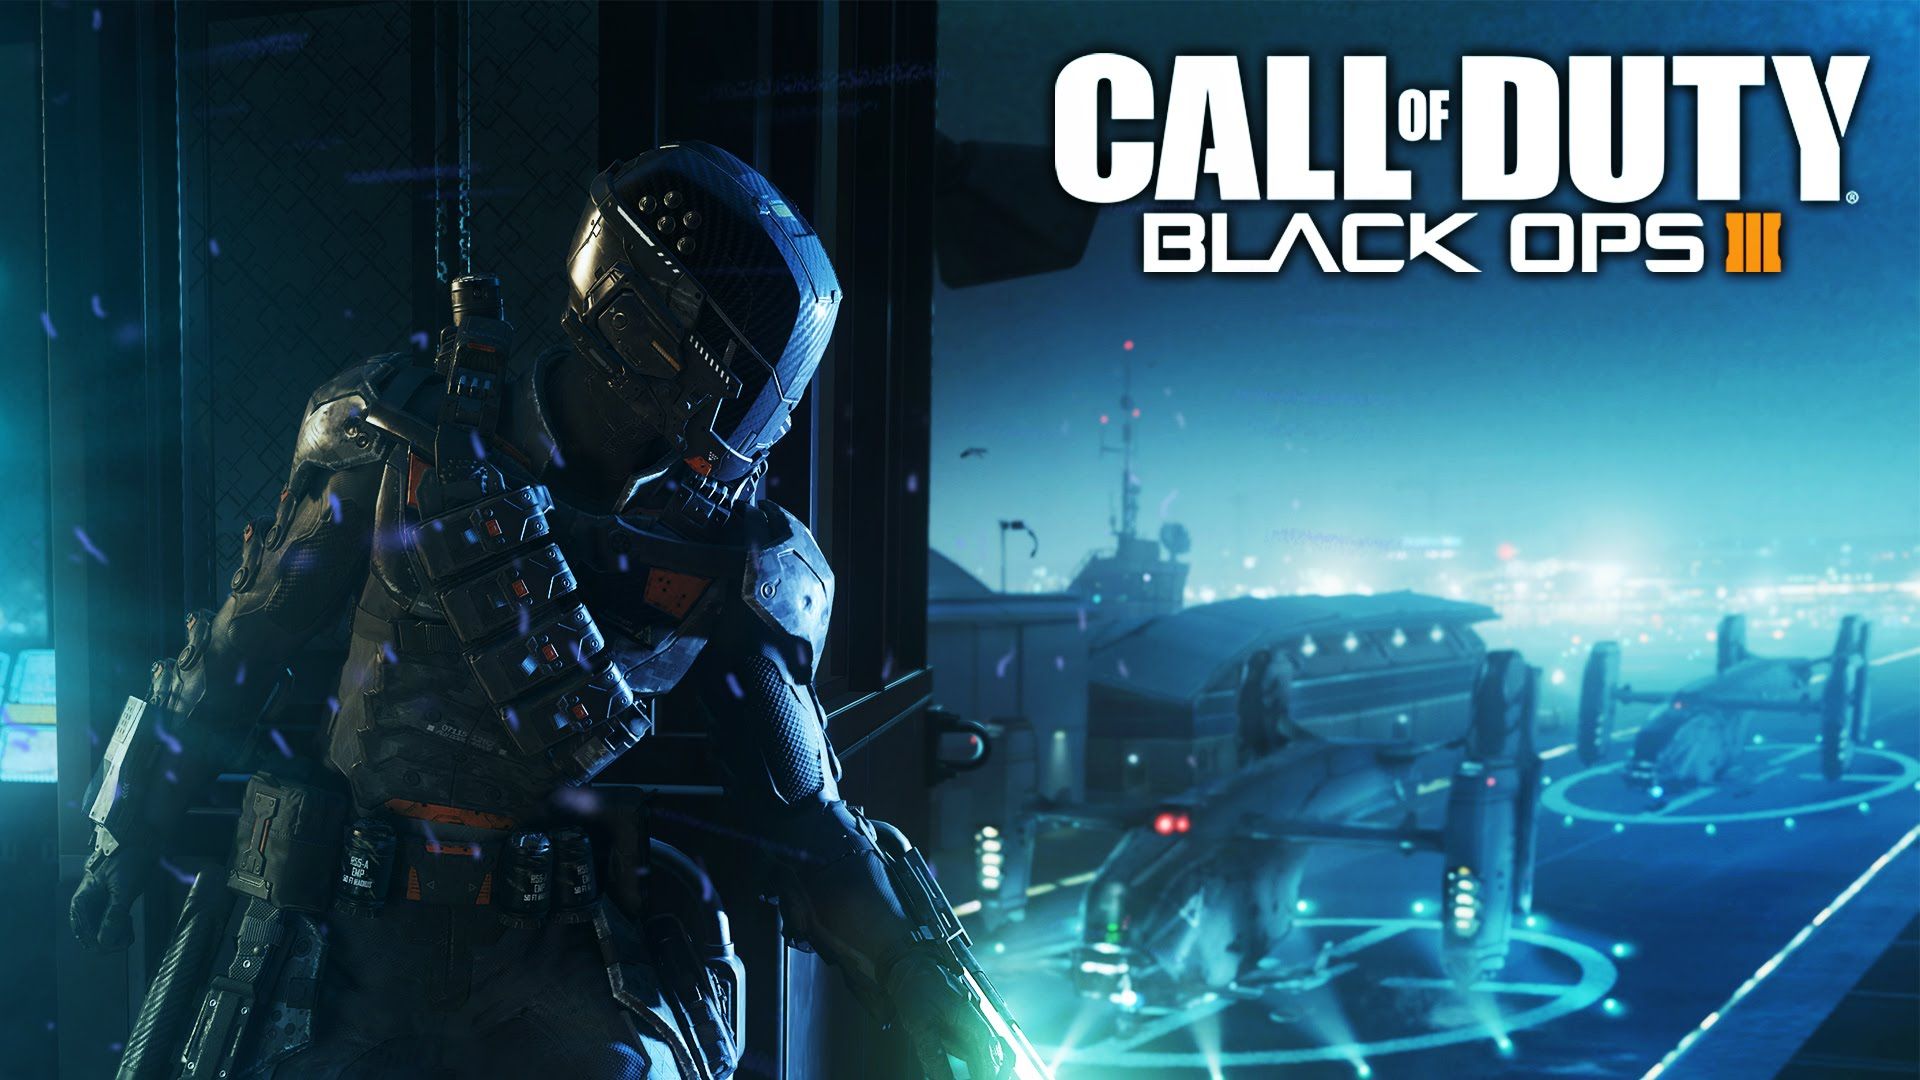 video game, call of duty: black ops iii, call of duty